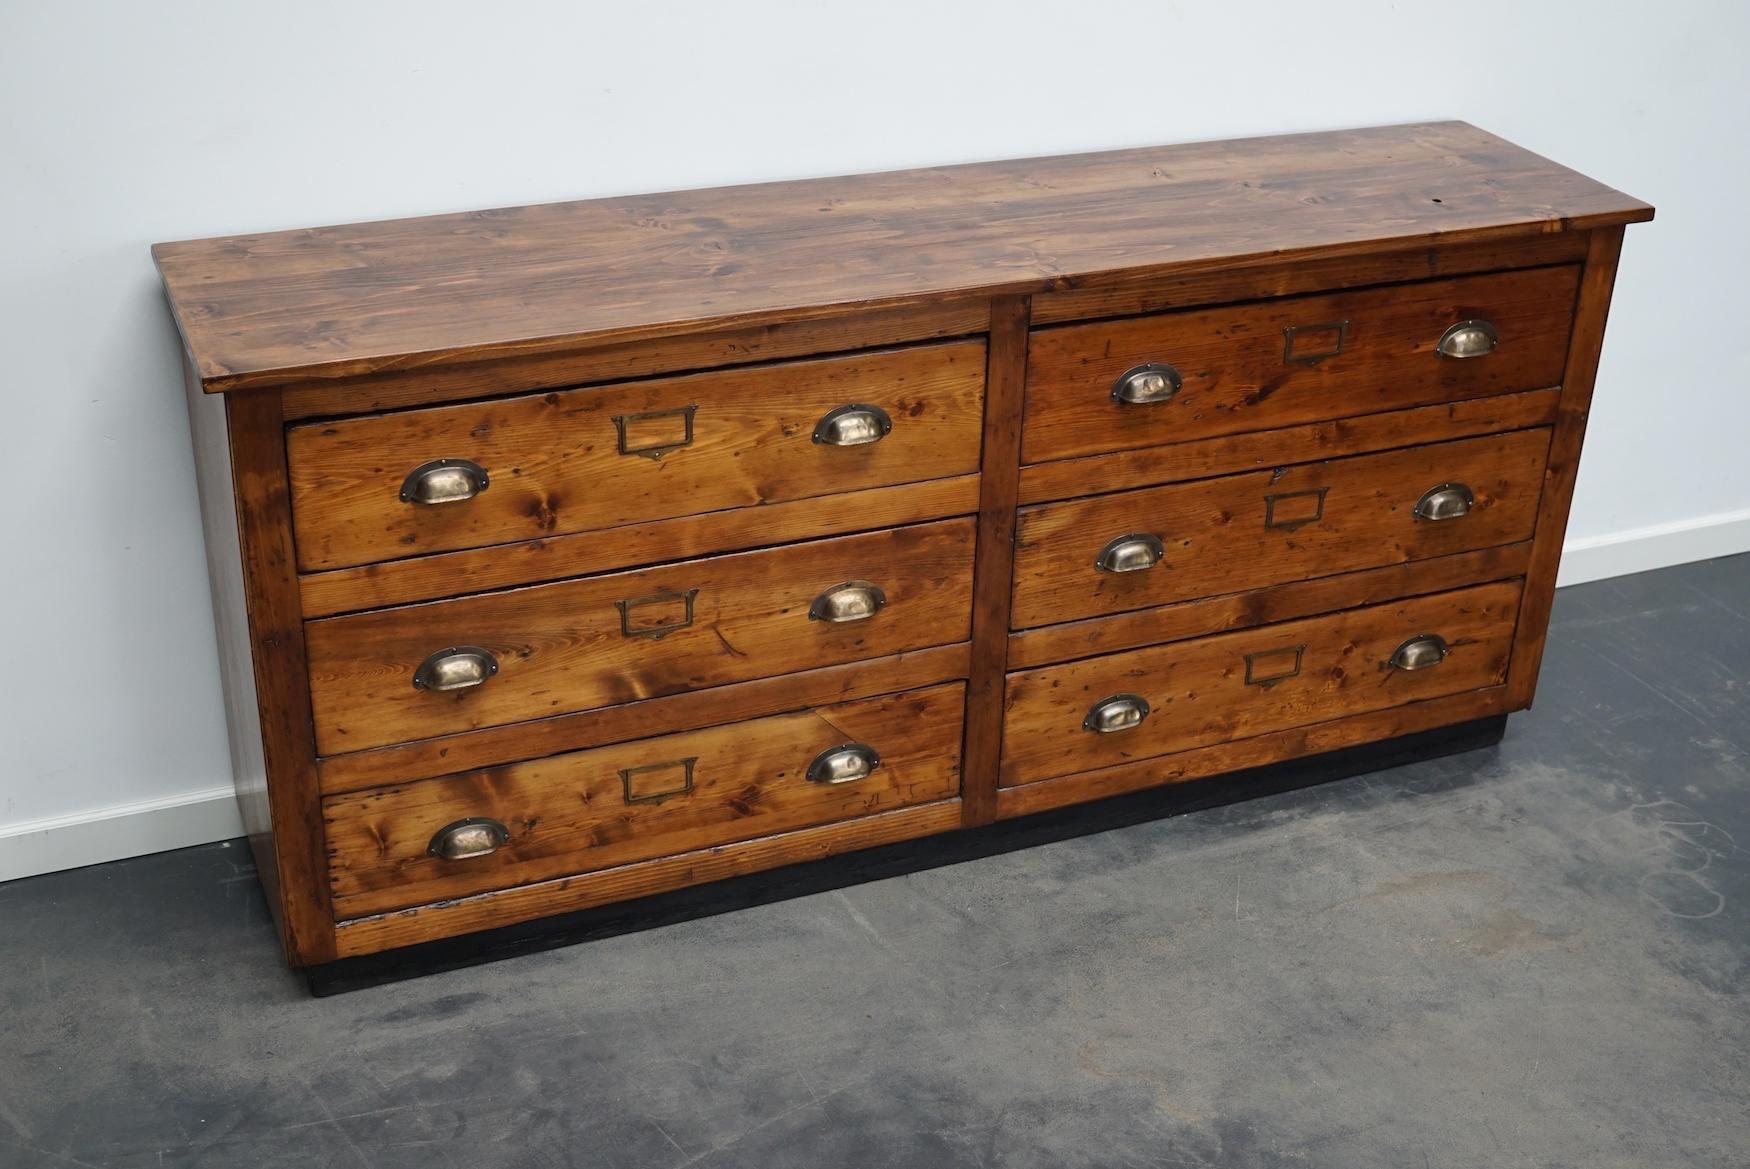 This apothecary cabinet was made from pine circa 1940 / 1950s in Germany. It features 6 decent sized drawers with nice brass handles and name card holders. The interior dimensions of the drawers are: DWH 31 x 71 x 13 cm.